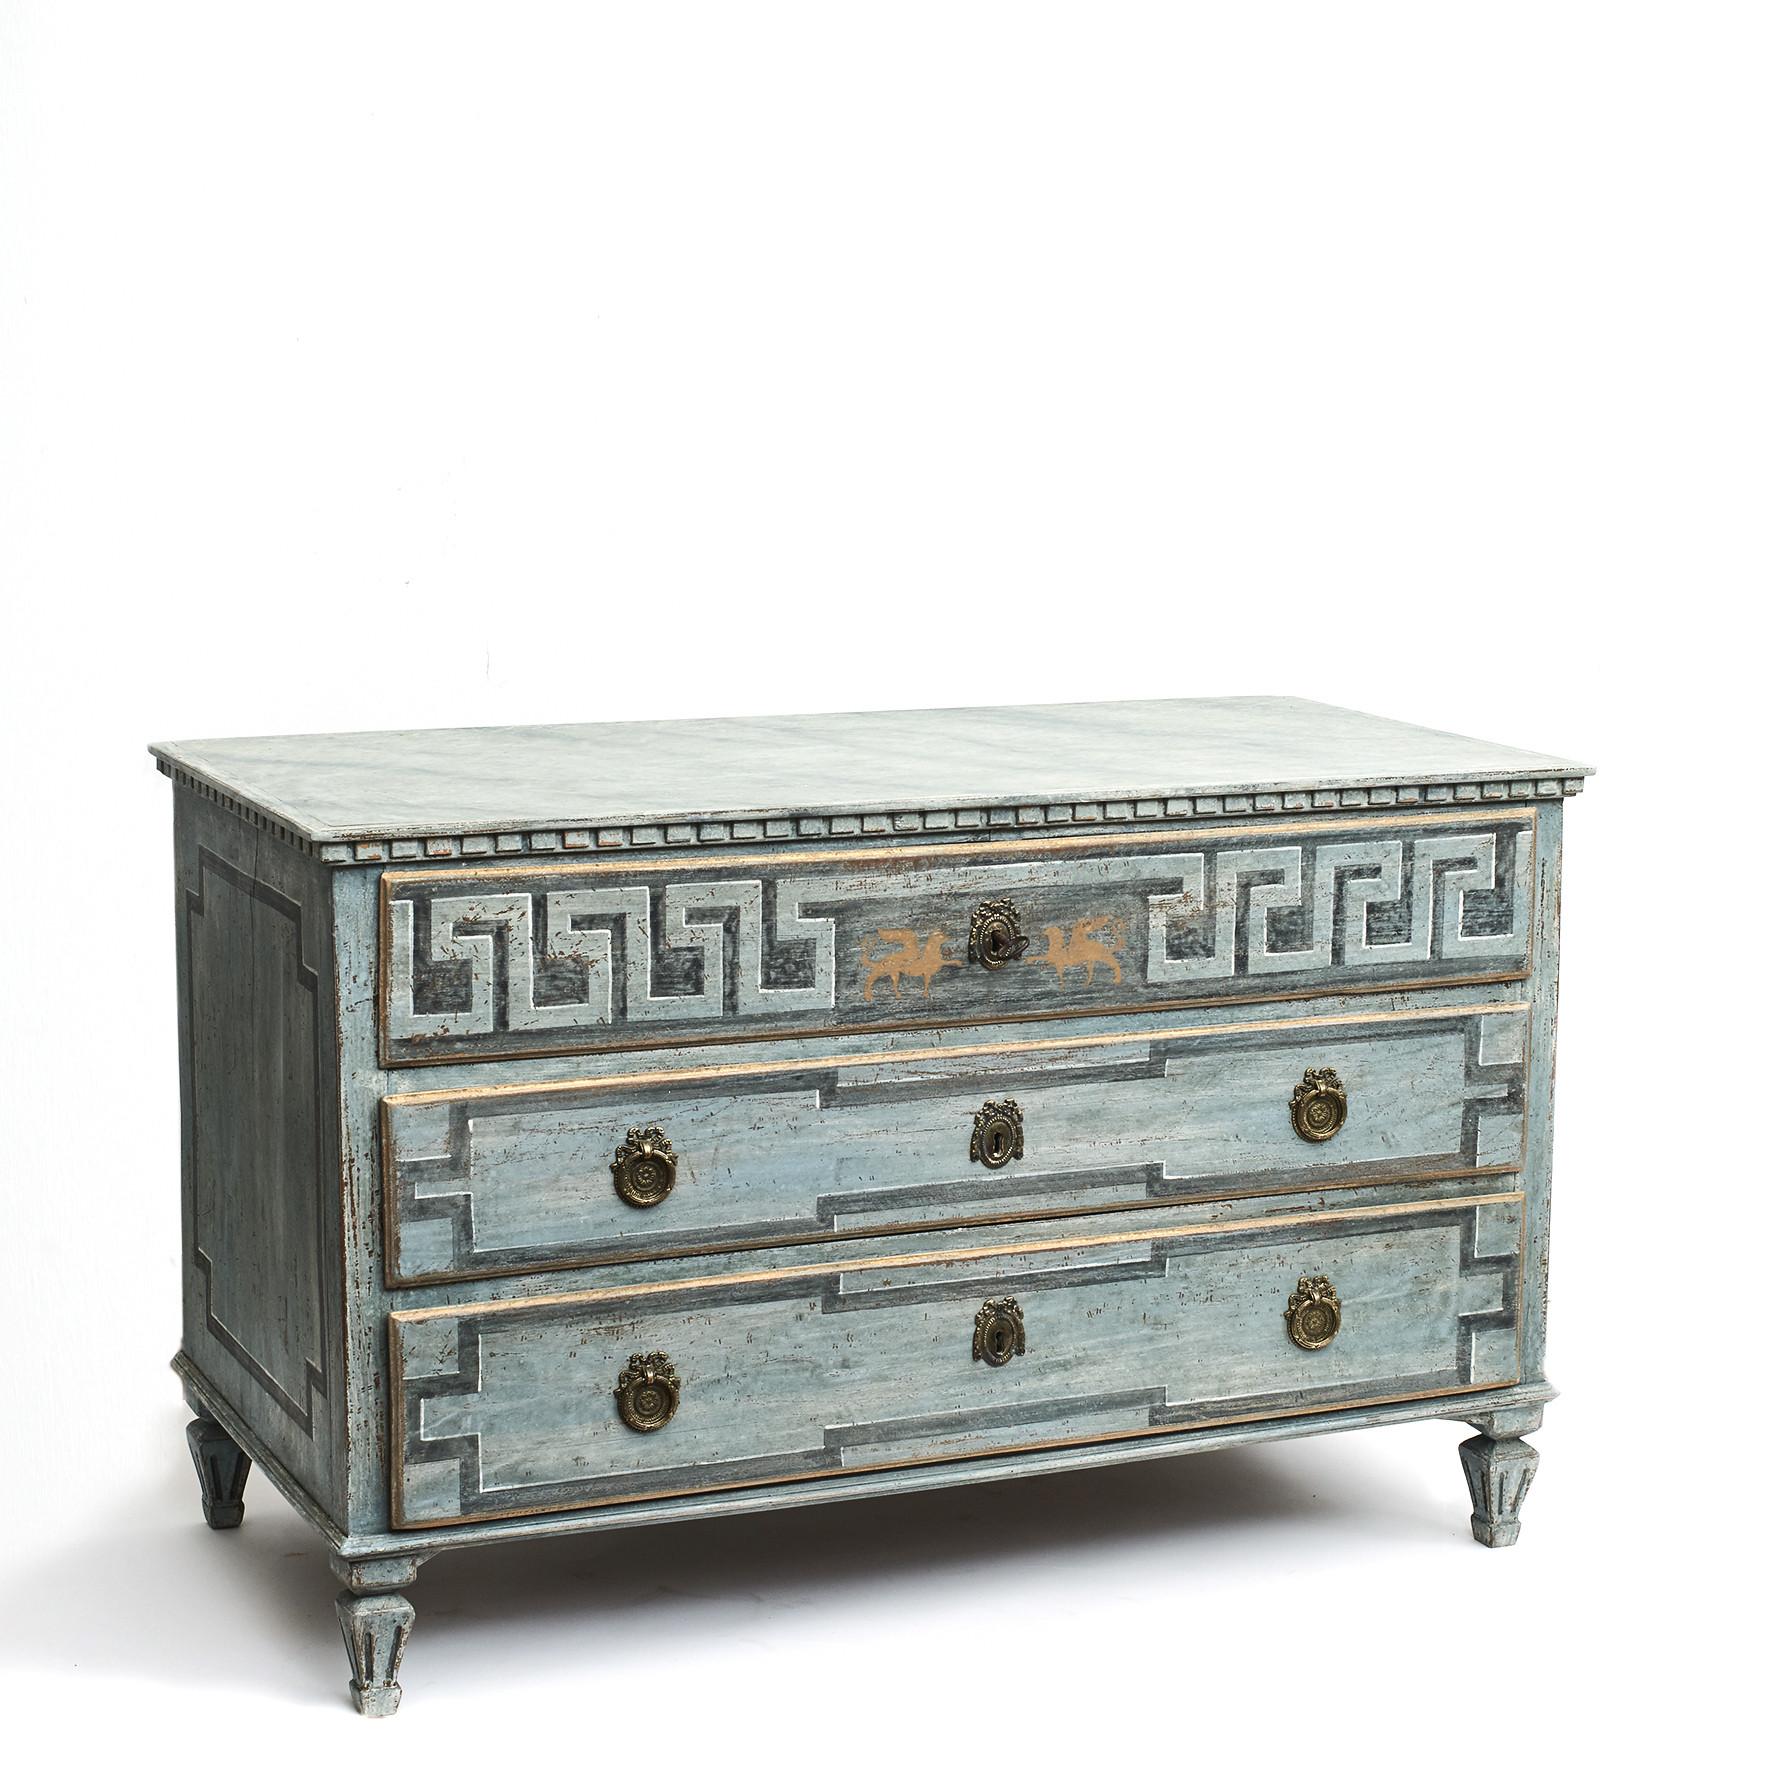 Swedish Gustavian chest of drawers painted in blue shades. Wooden gray marbled tabletop.
Three drawer, upper drawer decorated with 